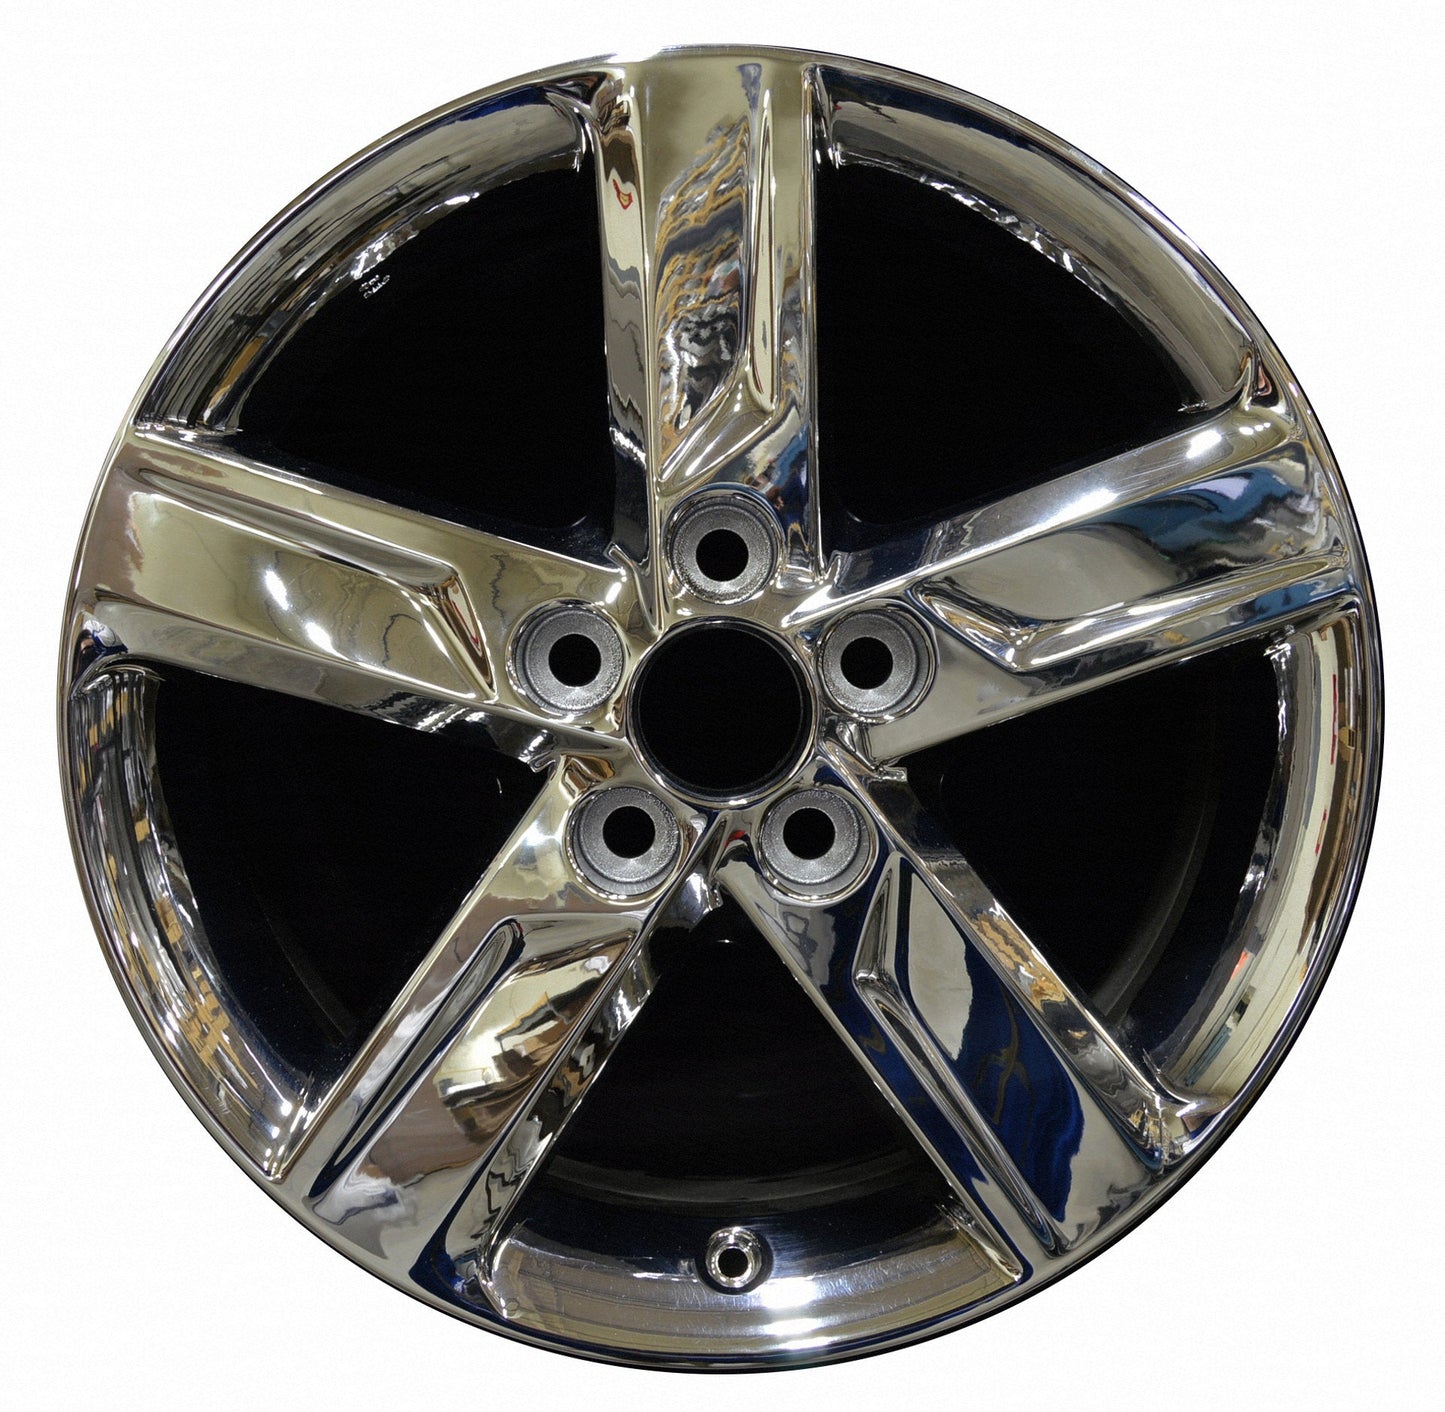 Toyota Camry  2009, 2010, 2011, 2012, 2013, 2014 Factory OEM Car Wheel Size 17x7 Alloy WAO.69604.PVD1.FF